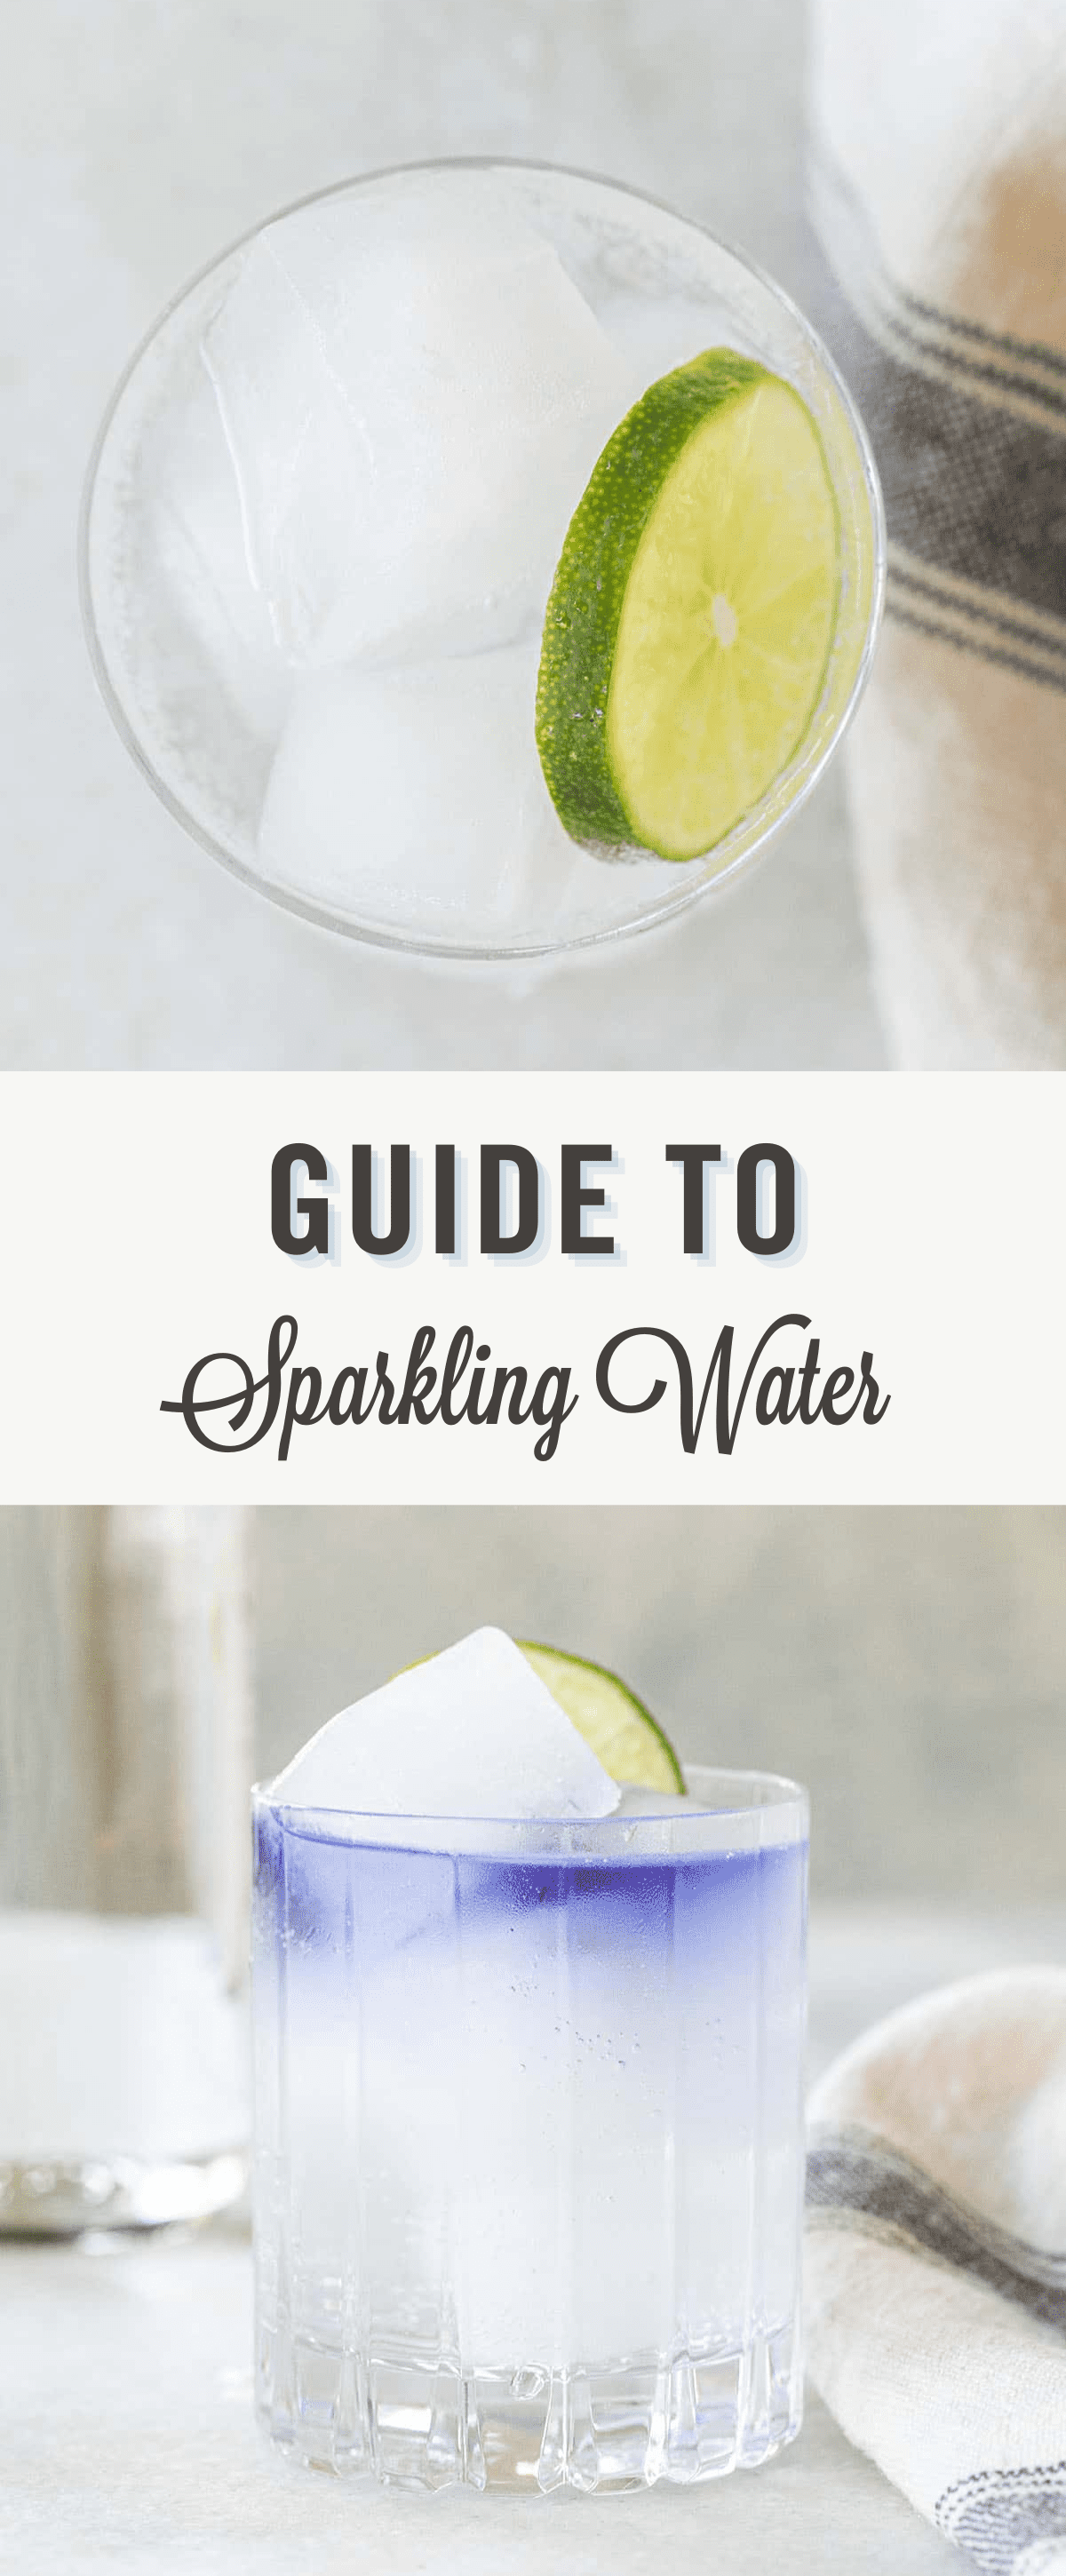 Guide to sparkling water with title.